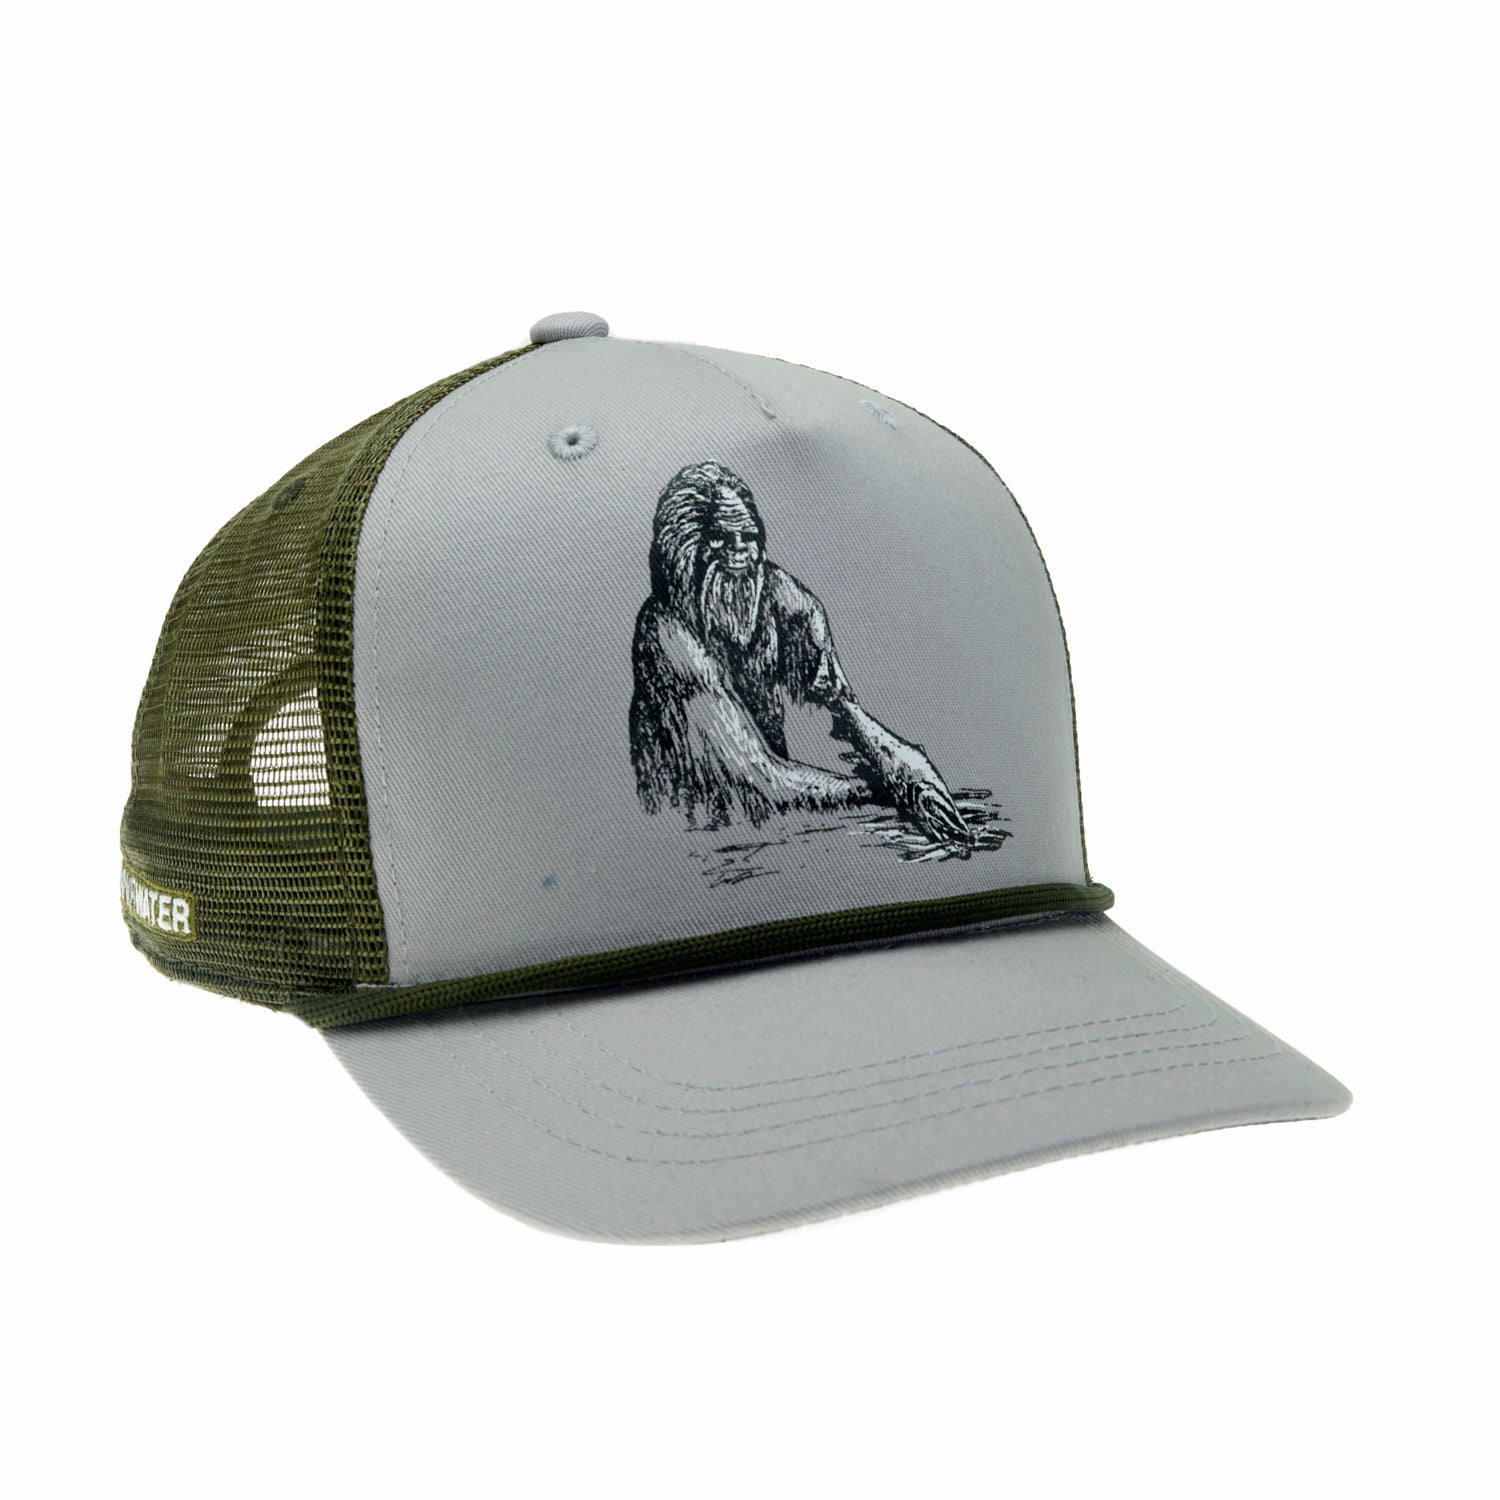 A hat with green mesh in back and gray fabric in front features a drawing of a sasquatch holding a trout in the water